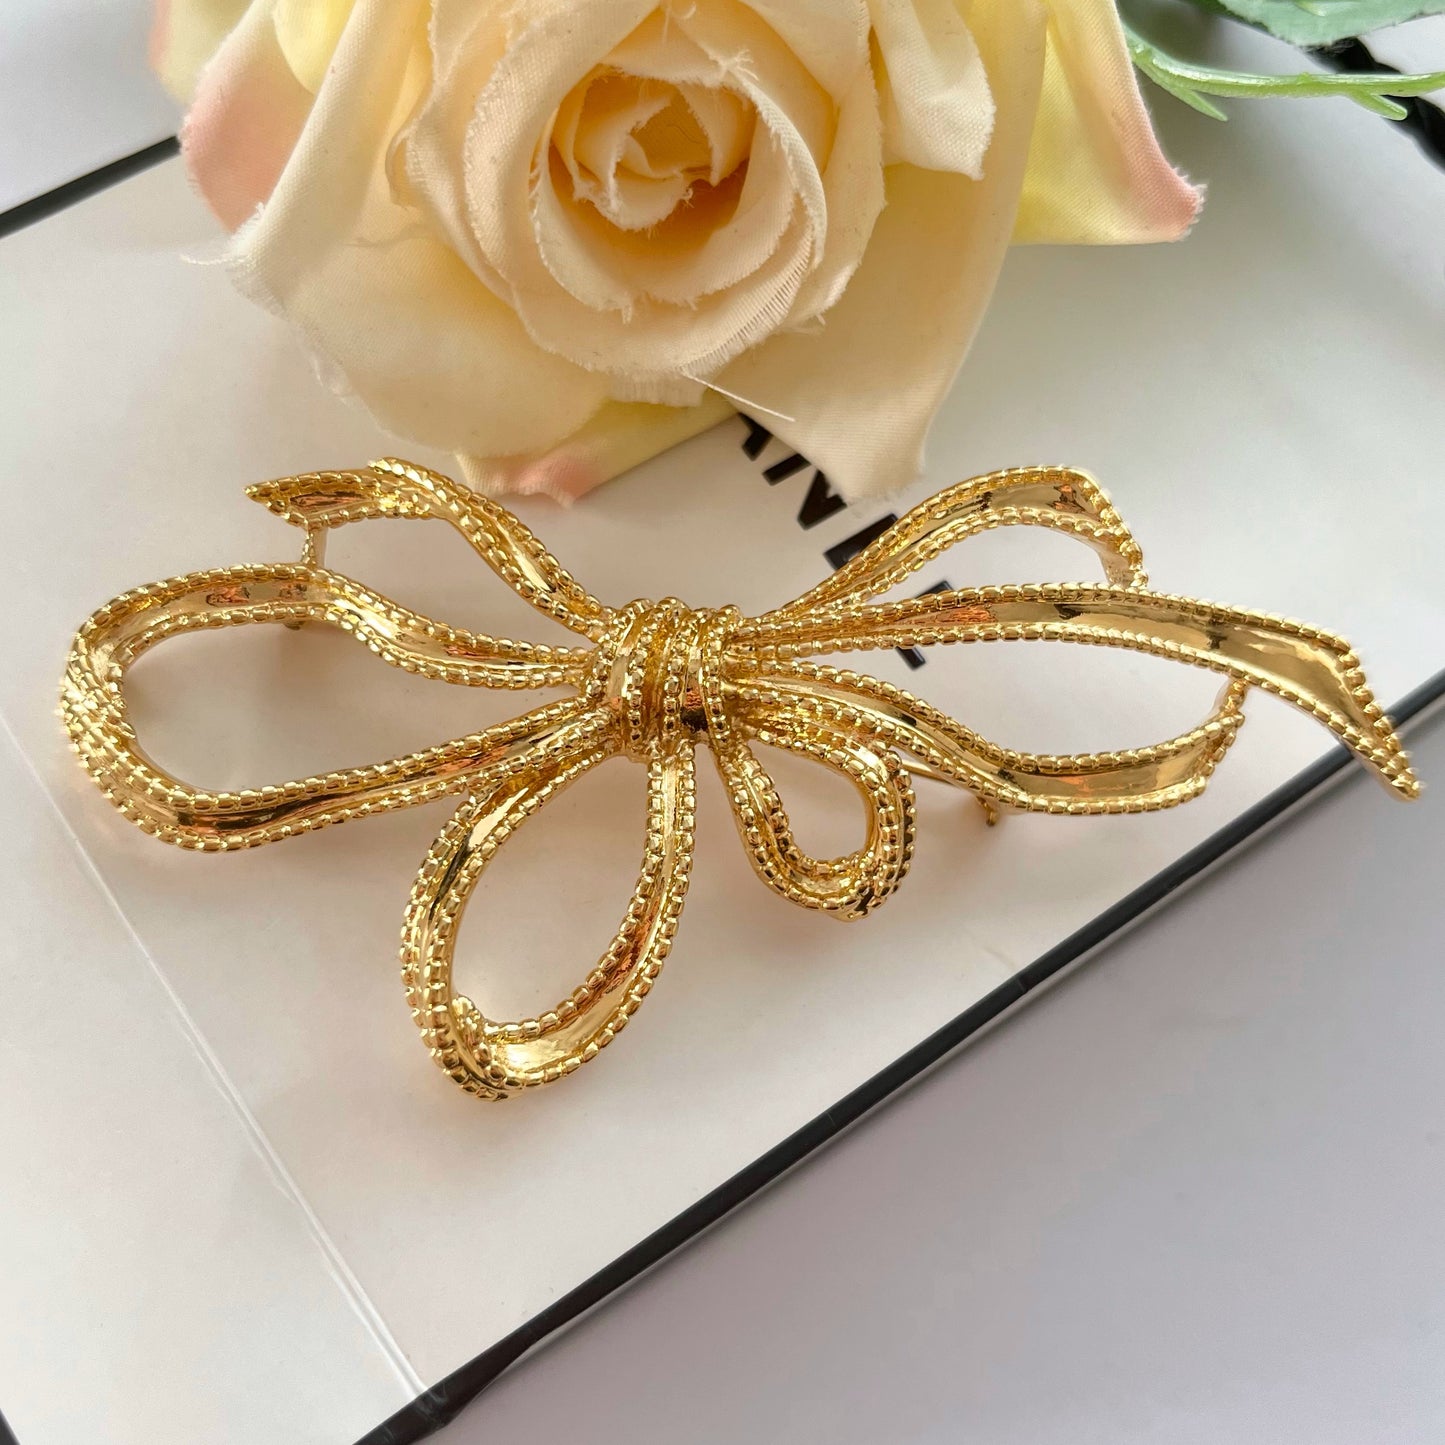 1980s Trifari Gold Plated Large Statement Ribbon Bow Brooch